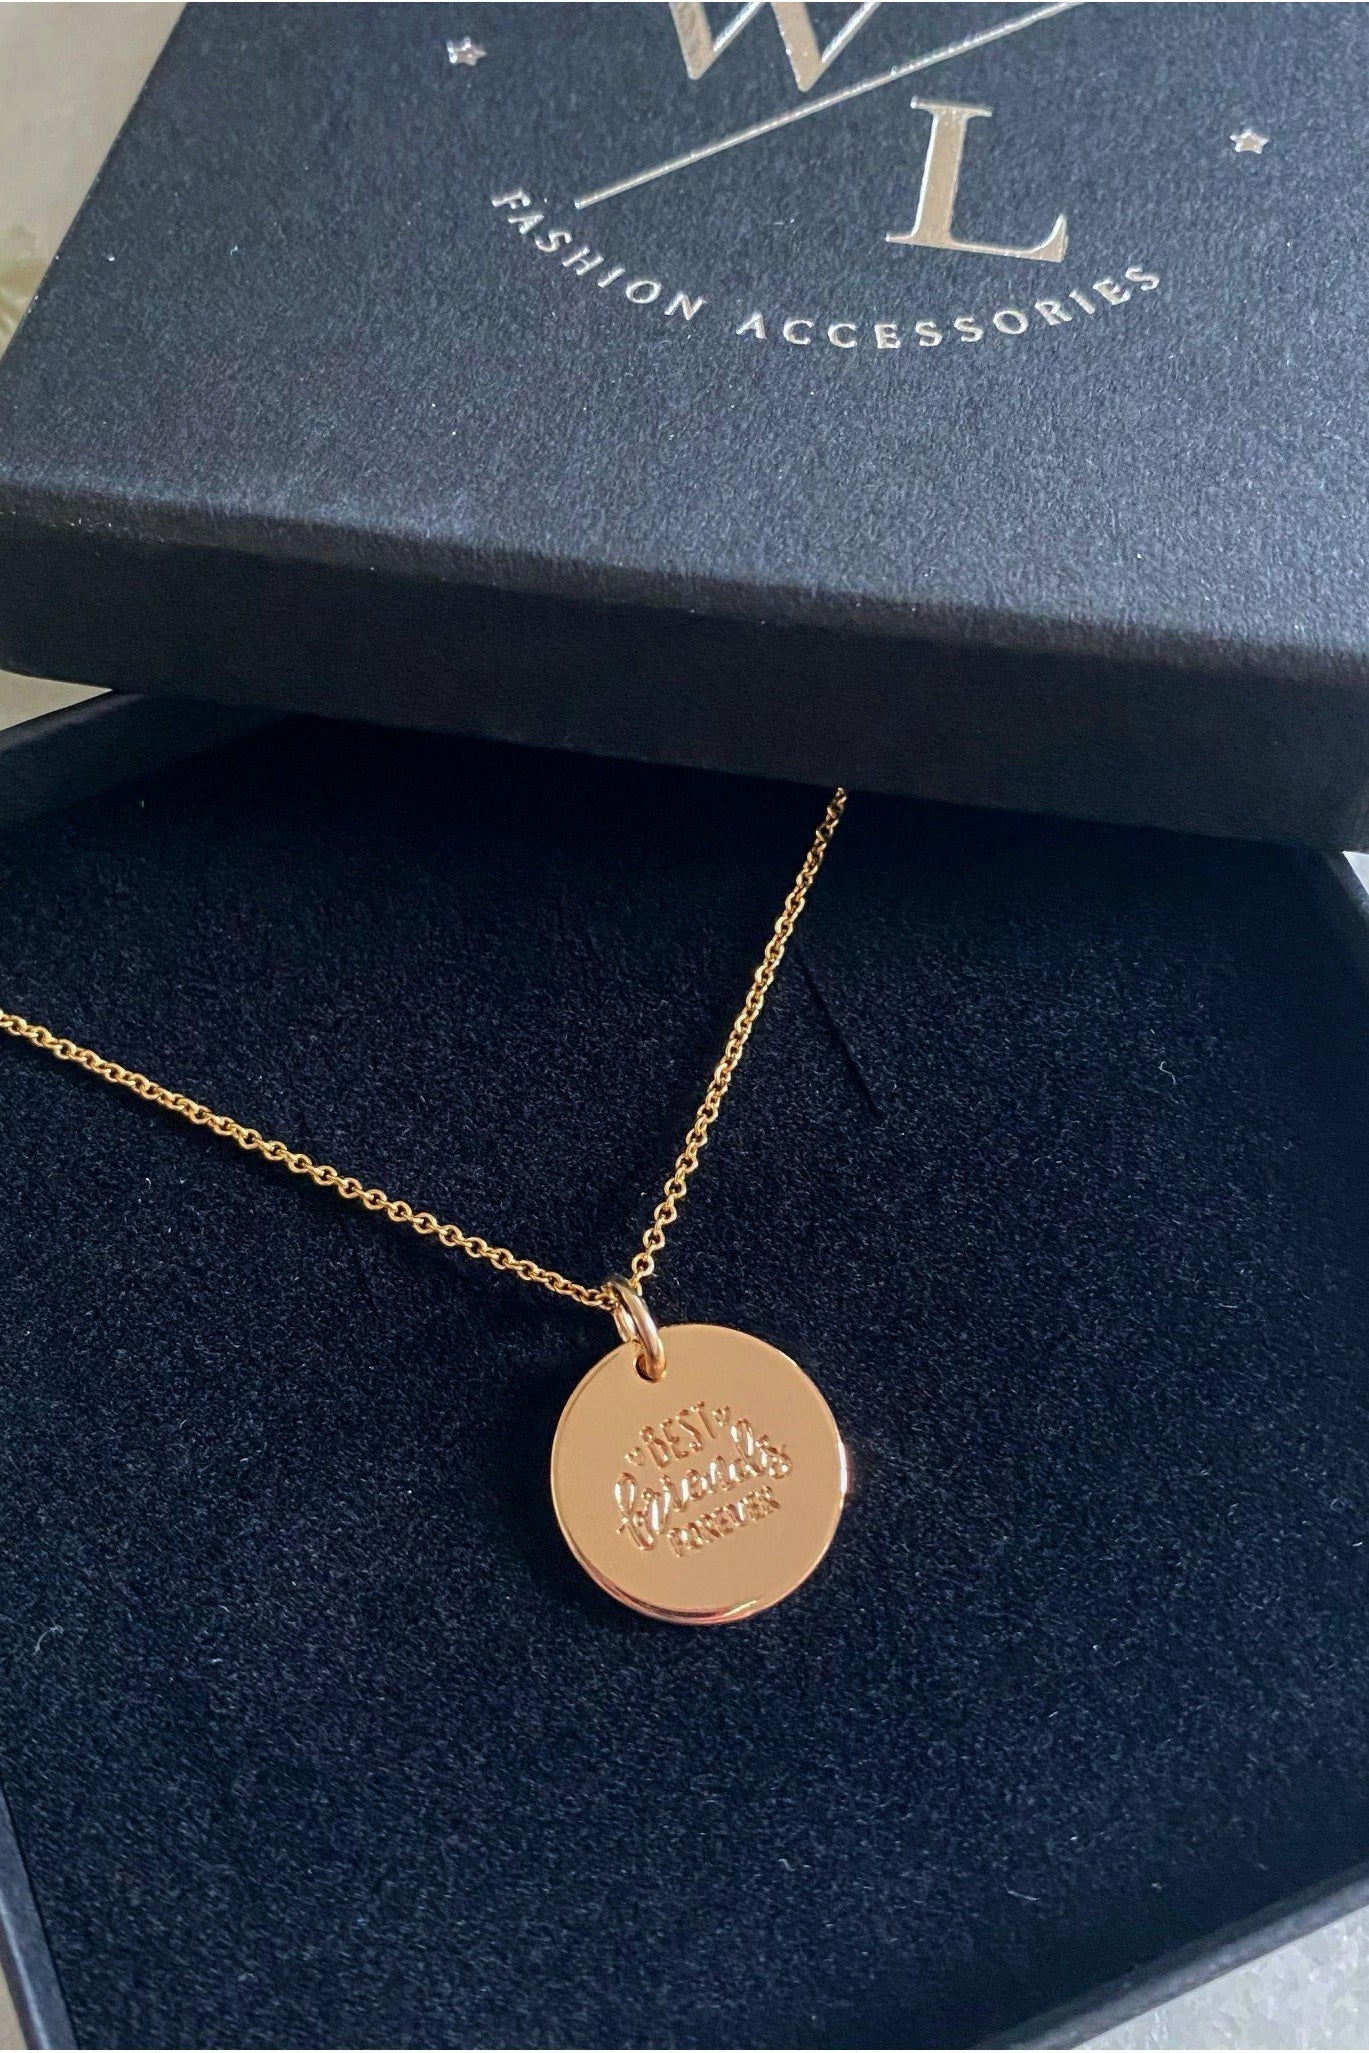 Best Friends Forever Gold Coin Necklace Best Friends Forever Gold Coin Necklace